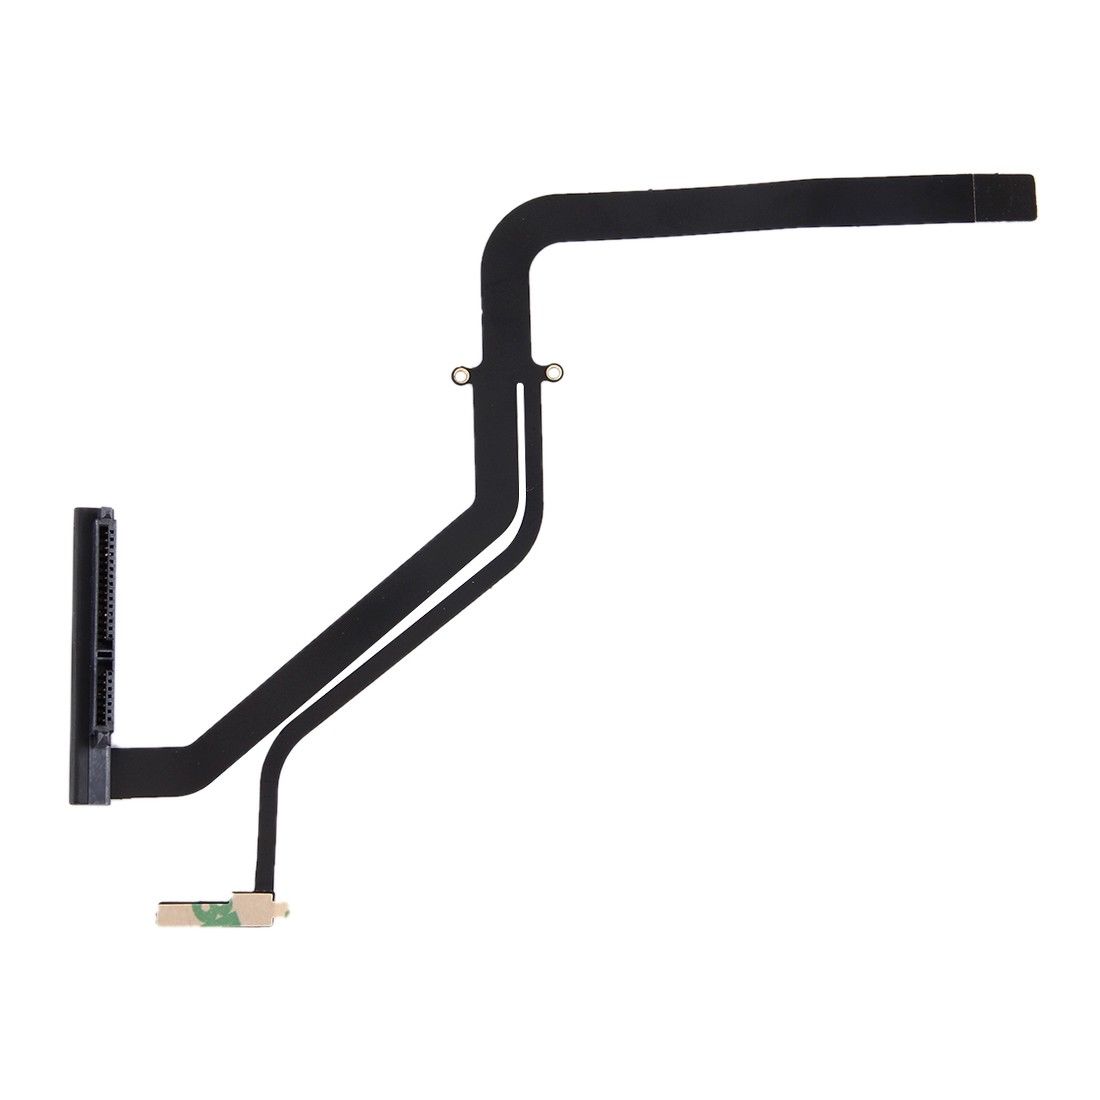 Macbook Pro 13" A1278 821-0814-A HDD Hard Drive Flex Cable for [product_price] - First Help Tech